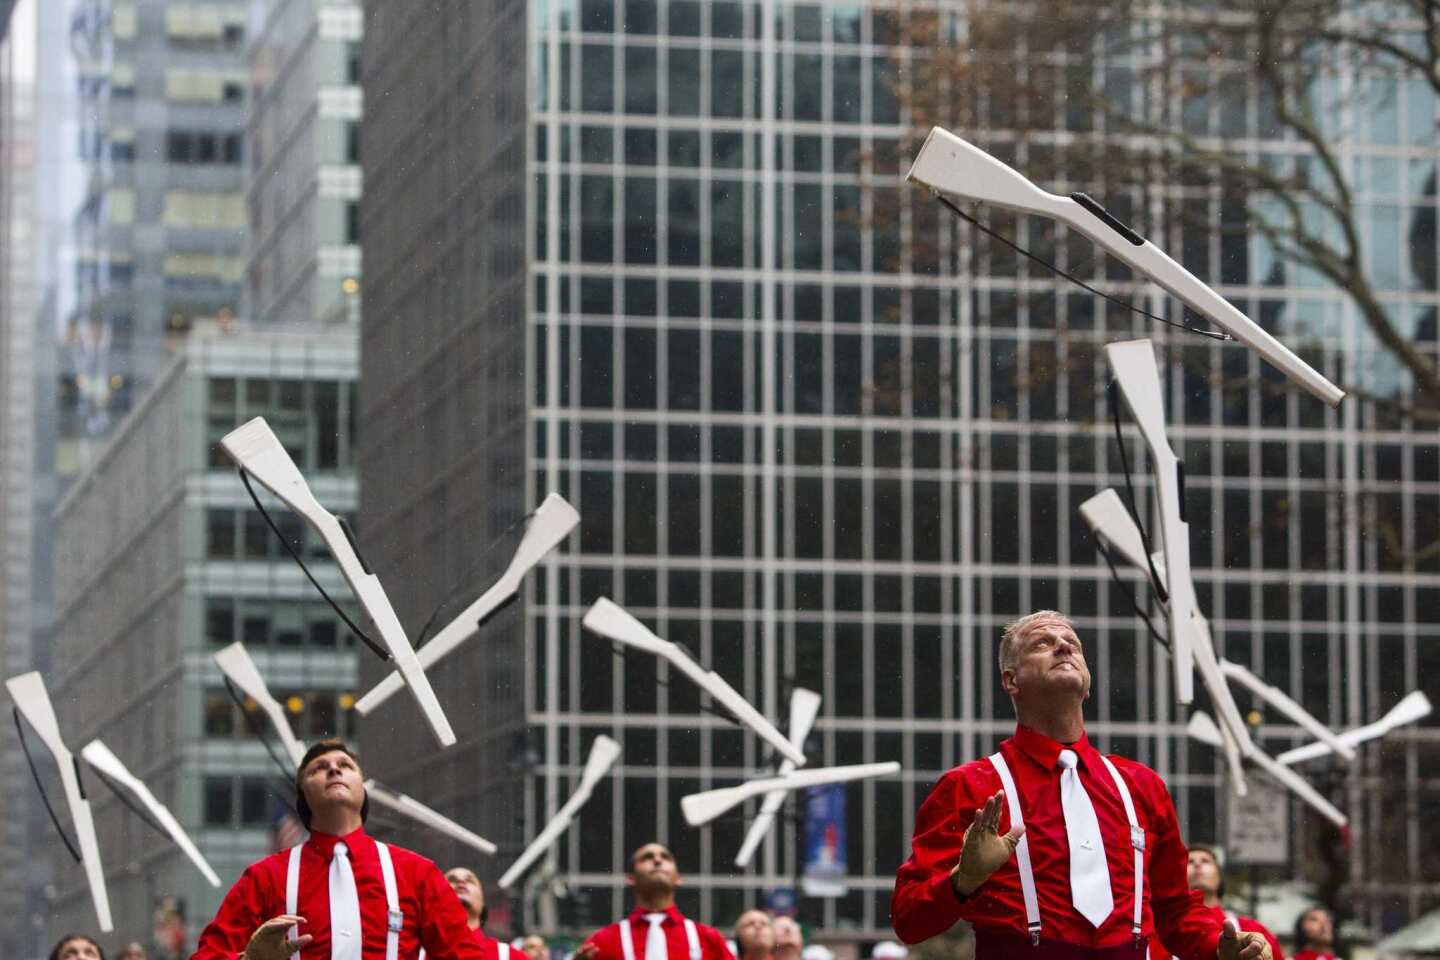 Members of the Madison Scouts perform during the 88th Annual Macy's Thanksgiving Day Parade.